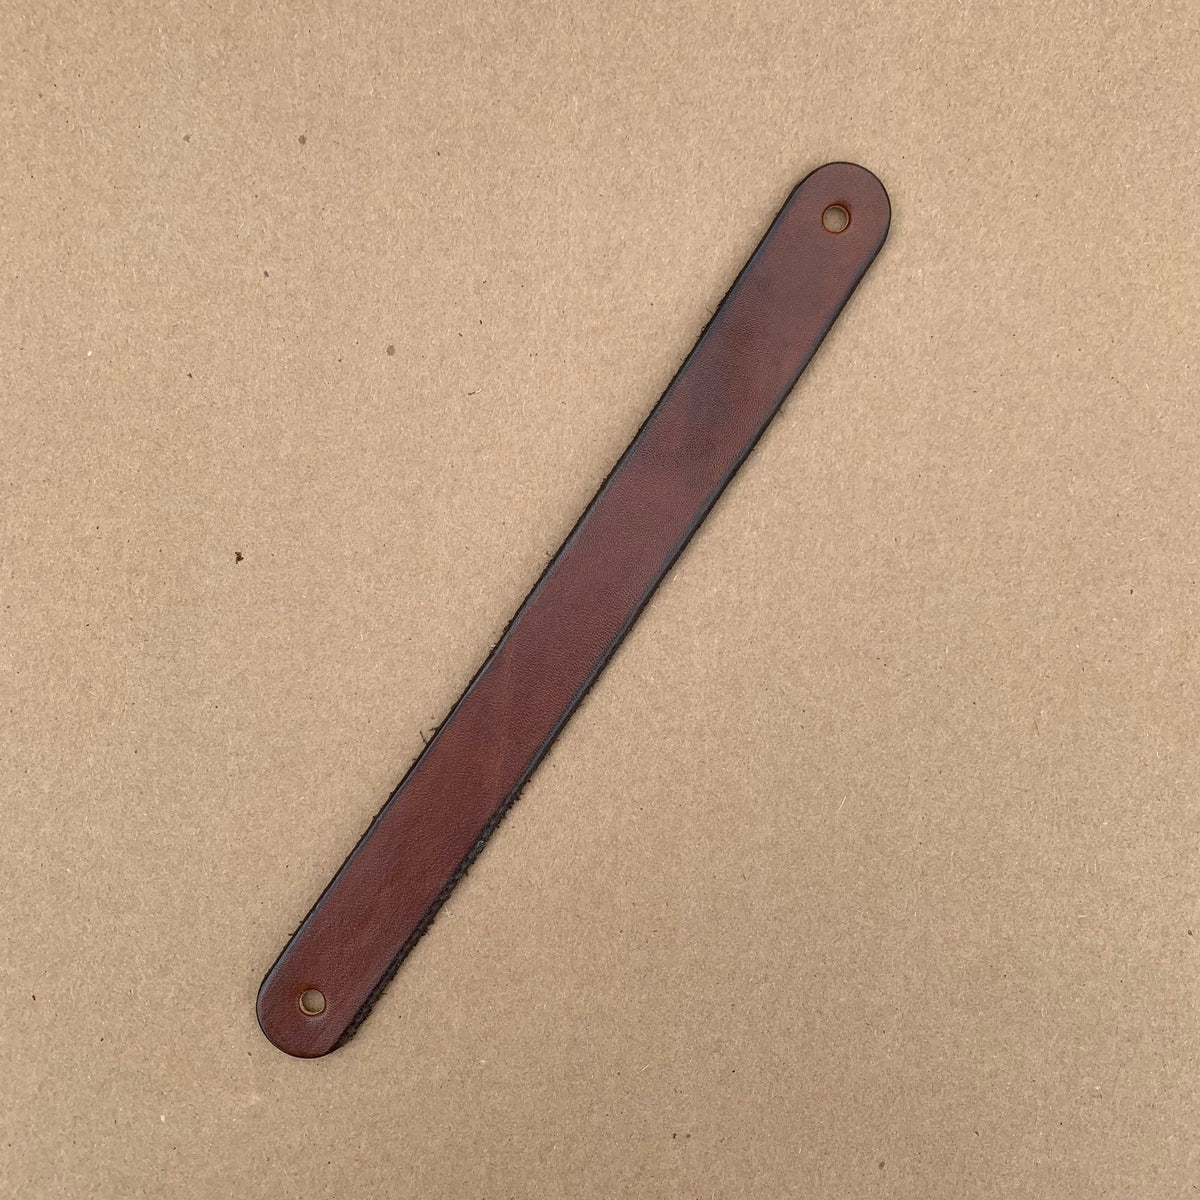 Walnut Studiolo AS-IS AS-IS SALE Leather Drawer Pull - The Hawthorne (Large) Dark Brown / Characterful Leather / Nickel Black or Brass (Please Specify)